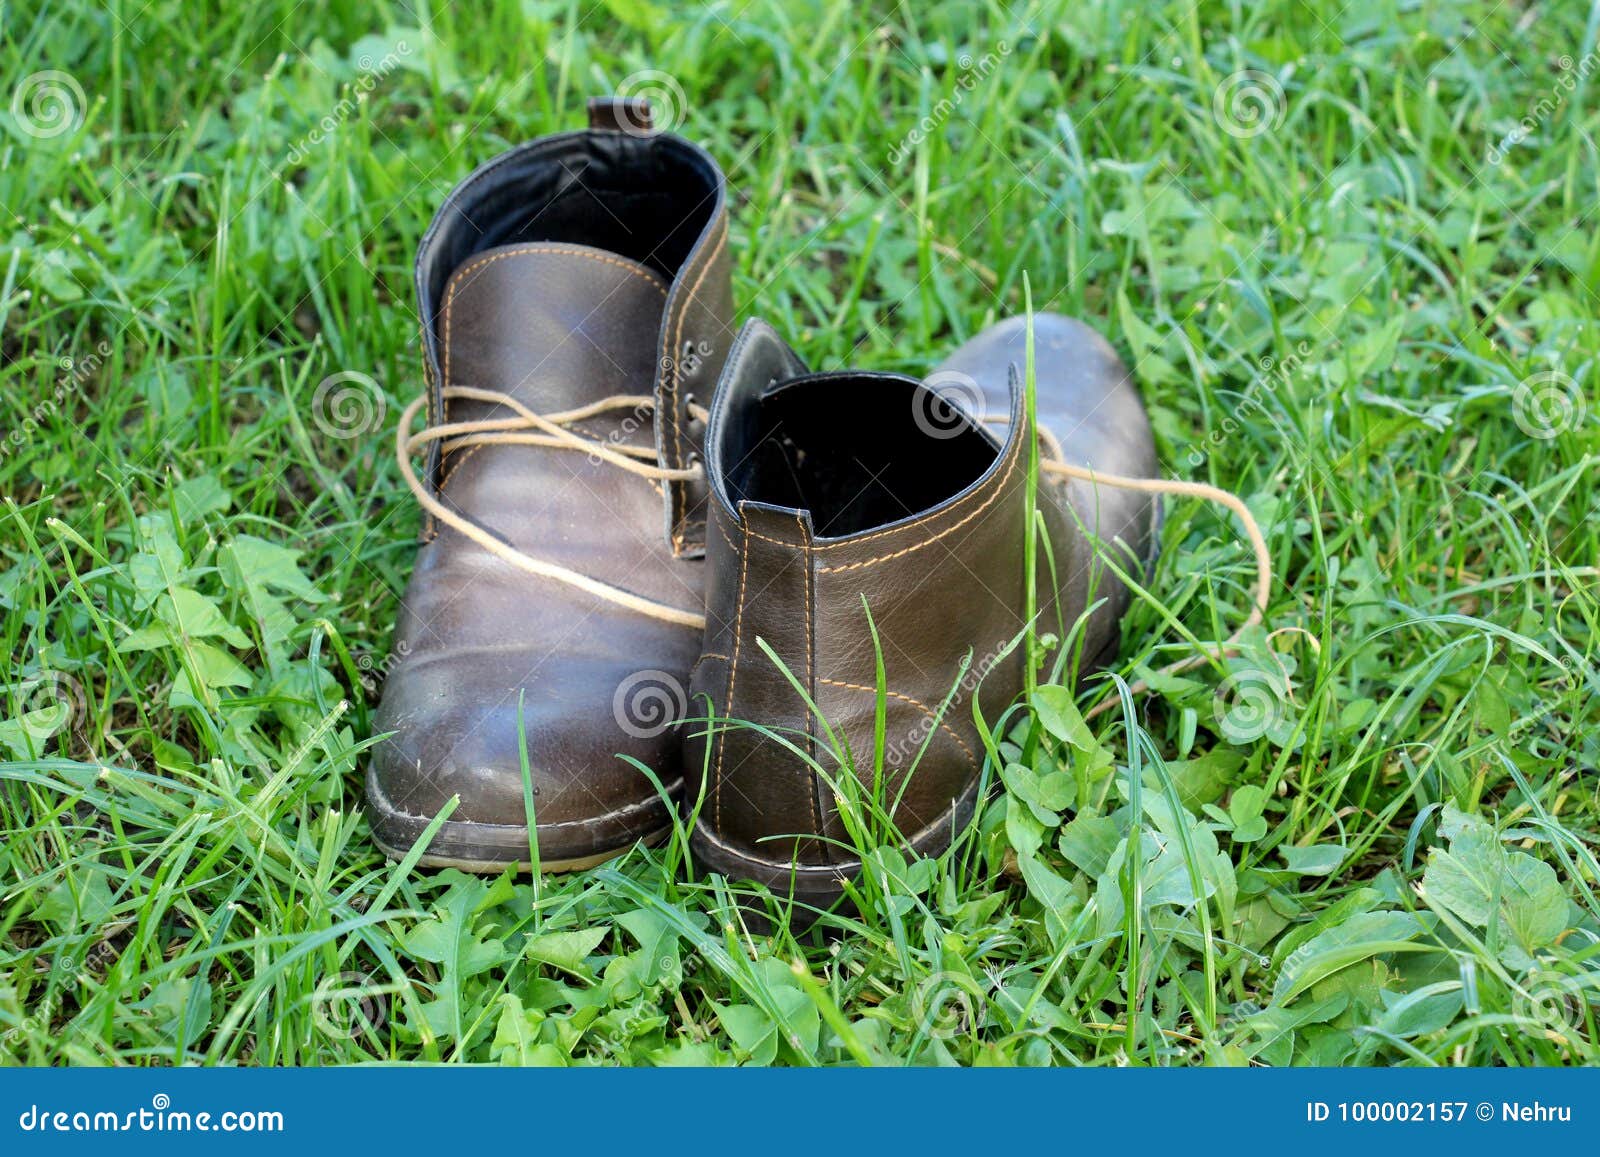 Warm Men`s Leather Boots on a Grass Background Stock Image - Image of ...